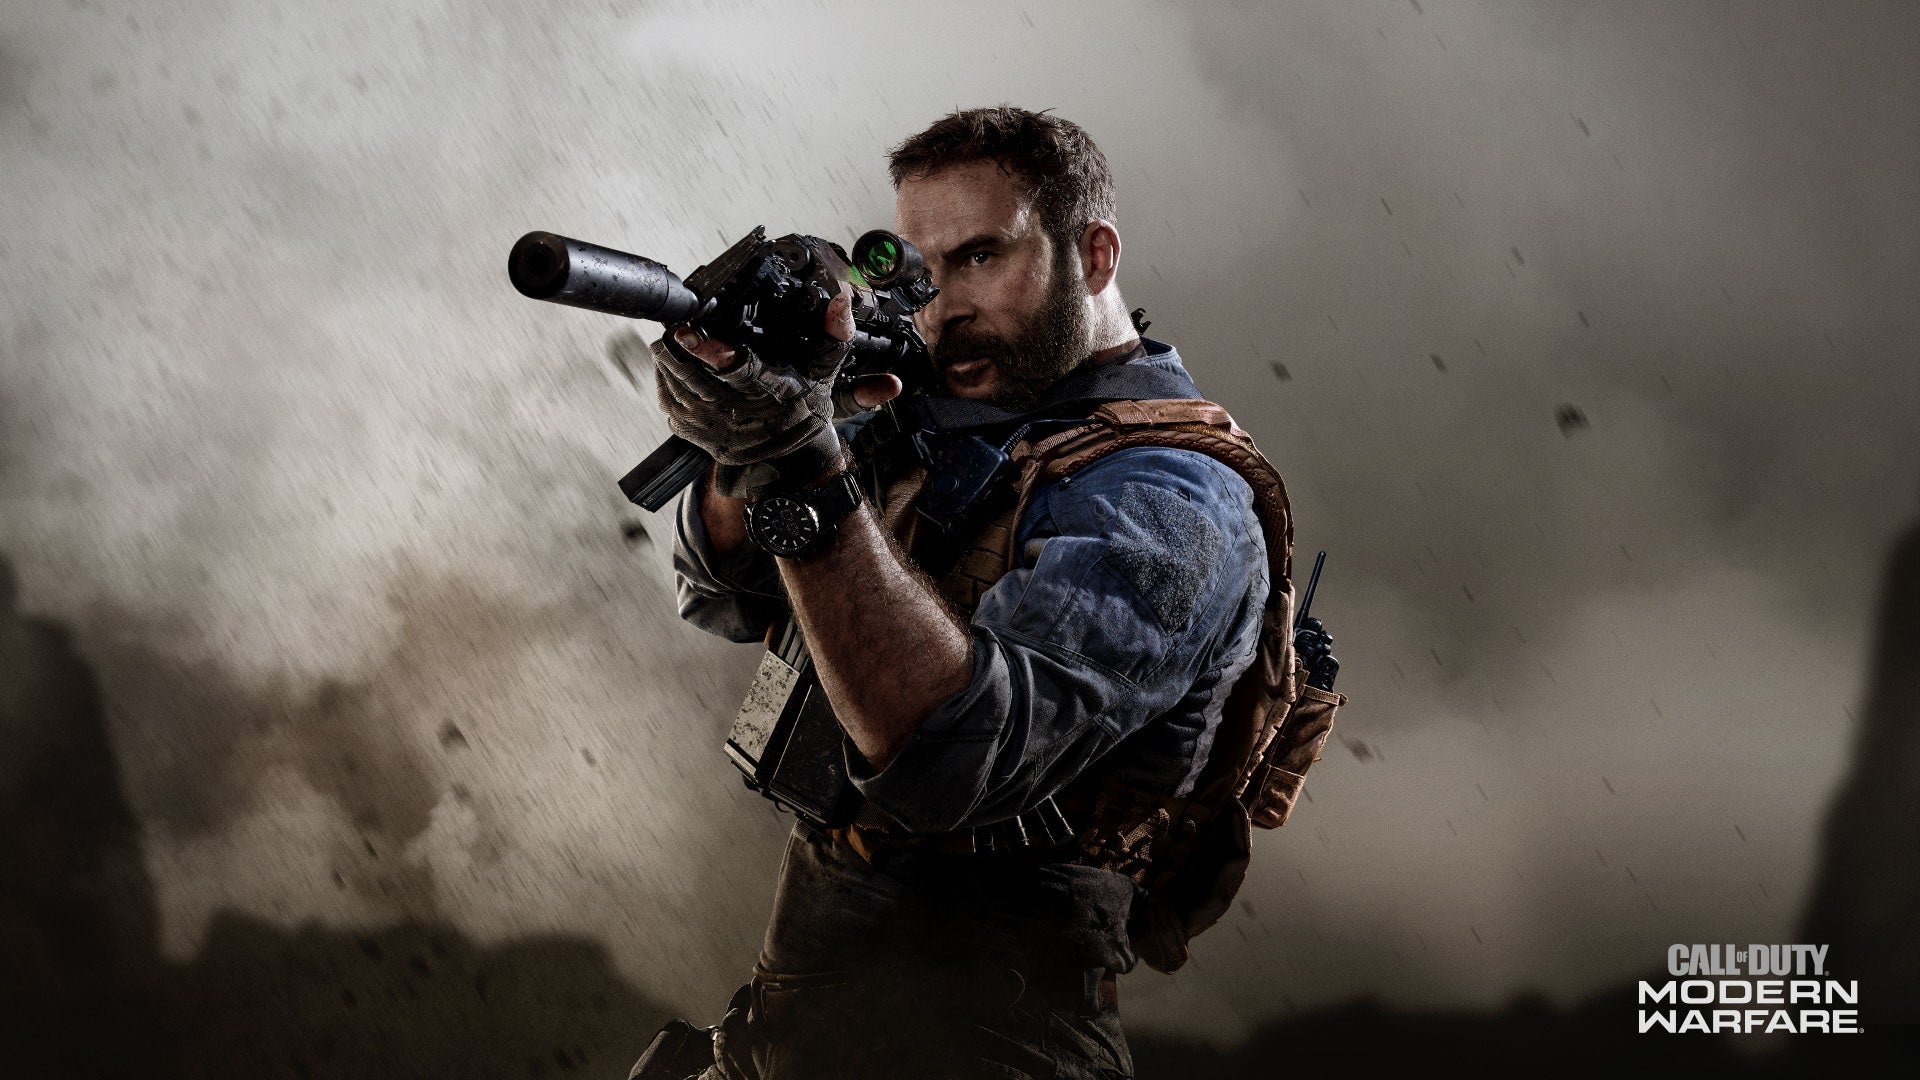 Image for Call of Duty: Modern Warfare revives the fan-favorite Spec Ops mode